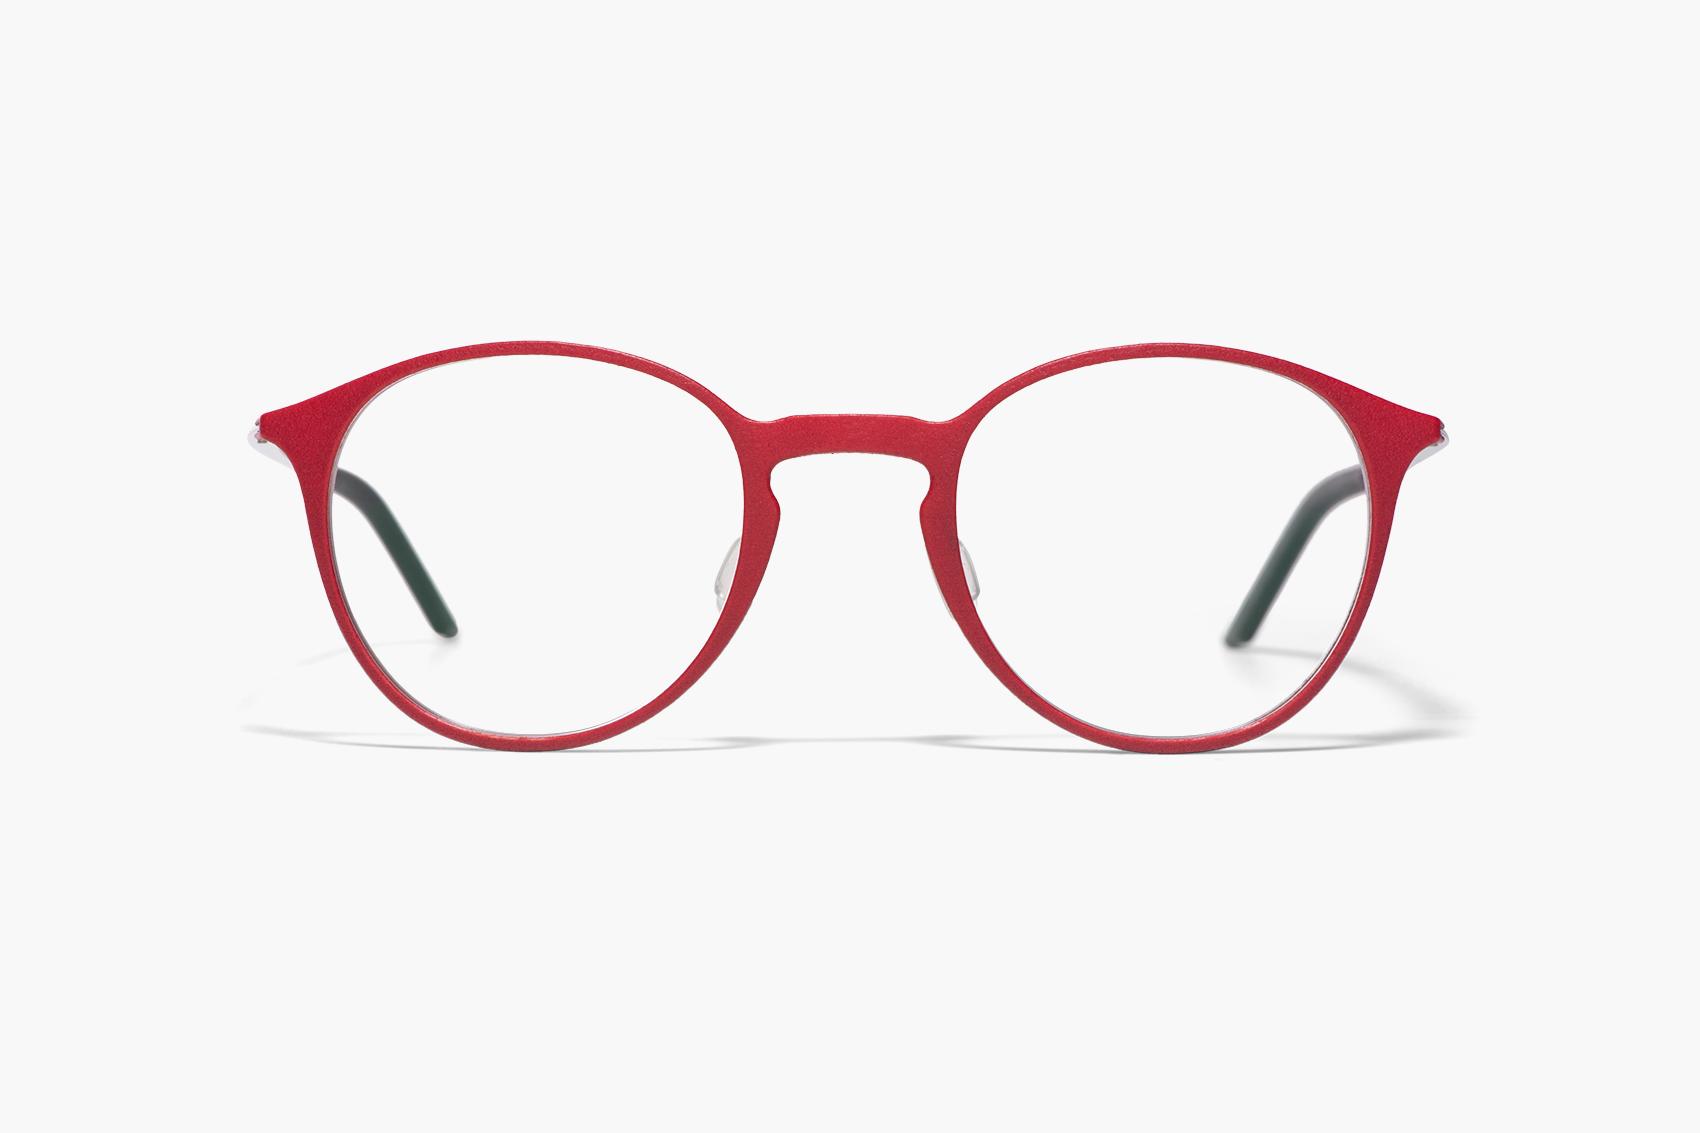 https://www.favrspecs.com/cdn-cgi/image/width=1920,quality=75,format=auto,fit=scale-down,background=%23F8F8F8/media/product-variants/7574/IAOrvG2epa4dWC6N/eyeglasses-monoqool-red-front.png